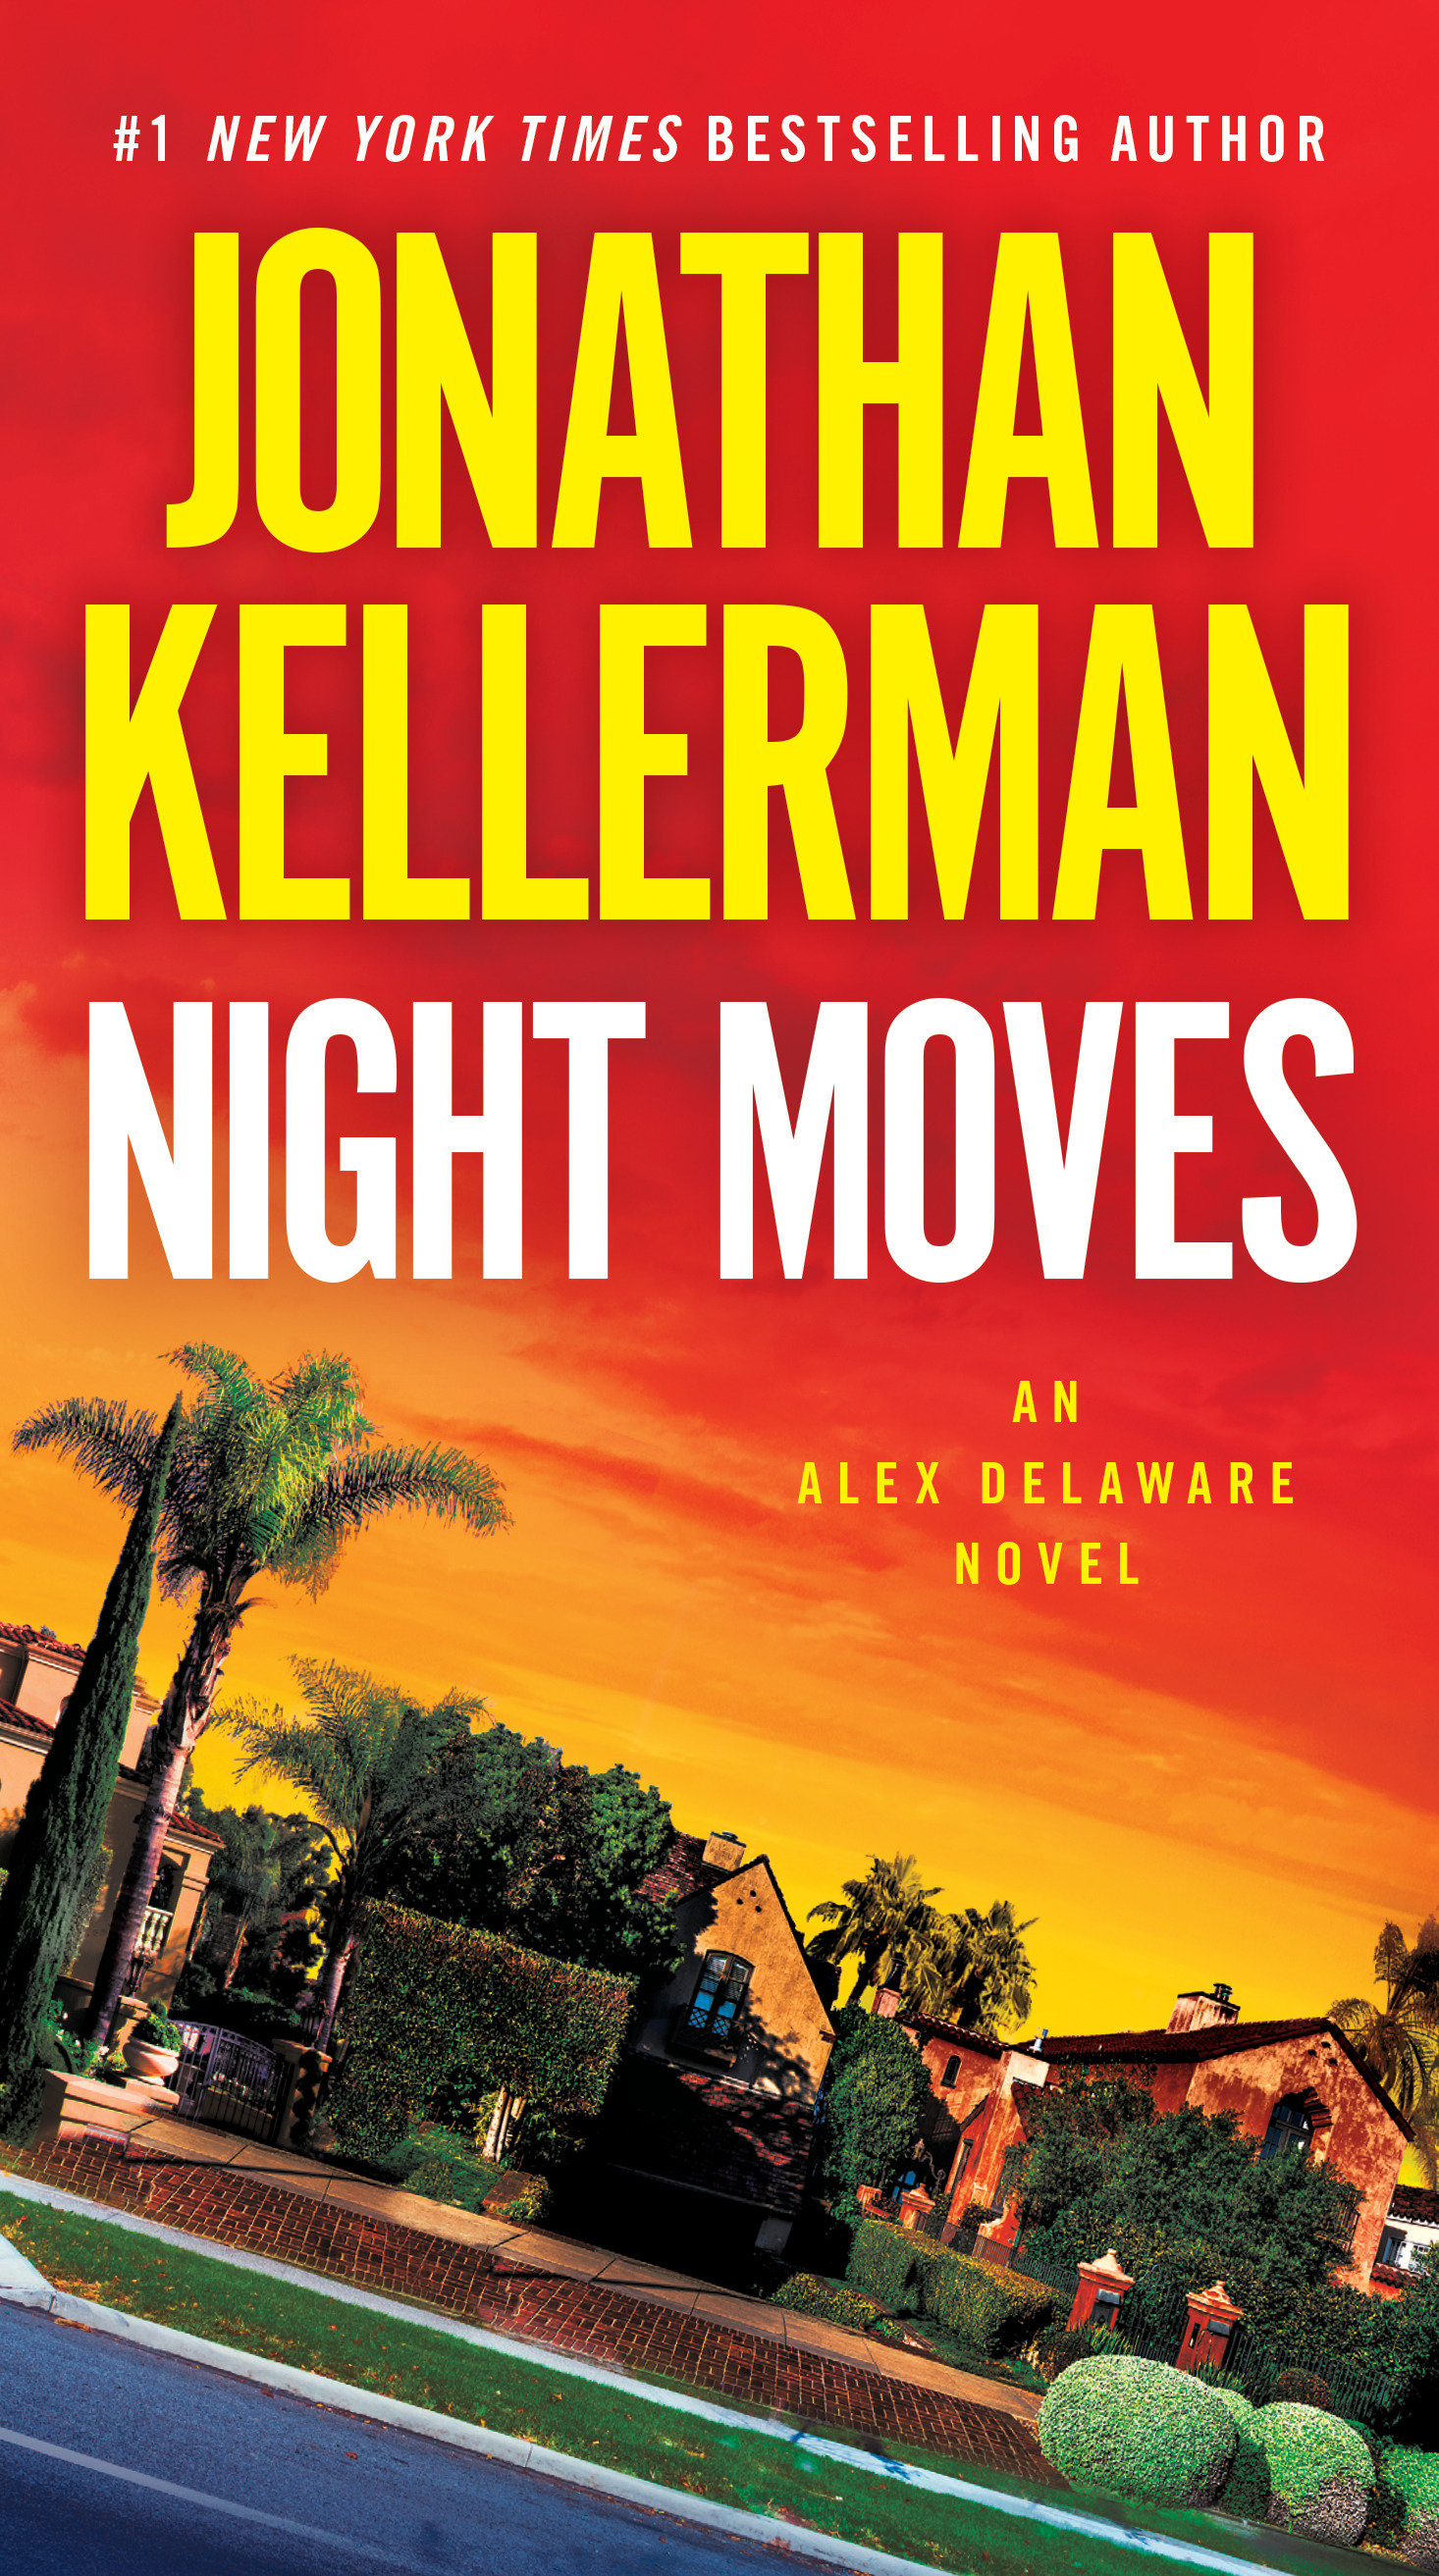 Night moves an Alex Delaware novel cover image